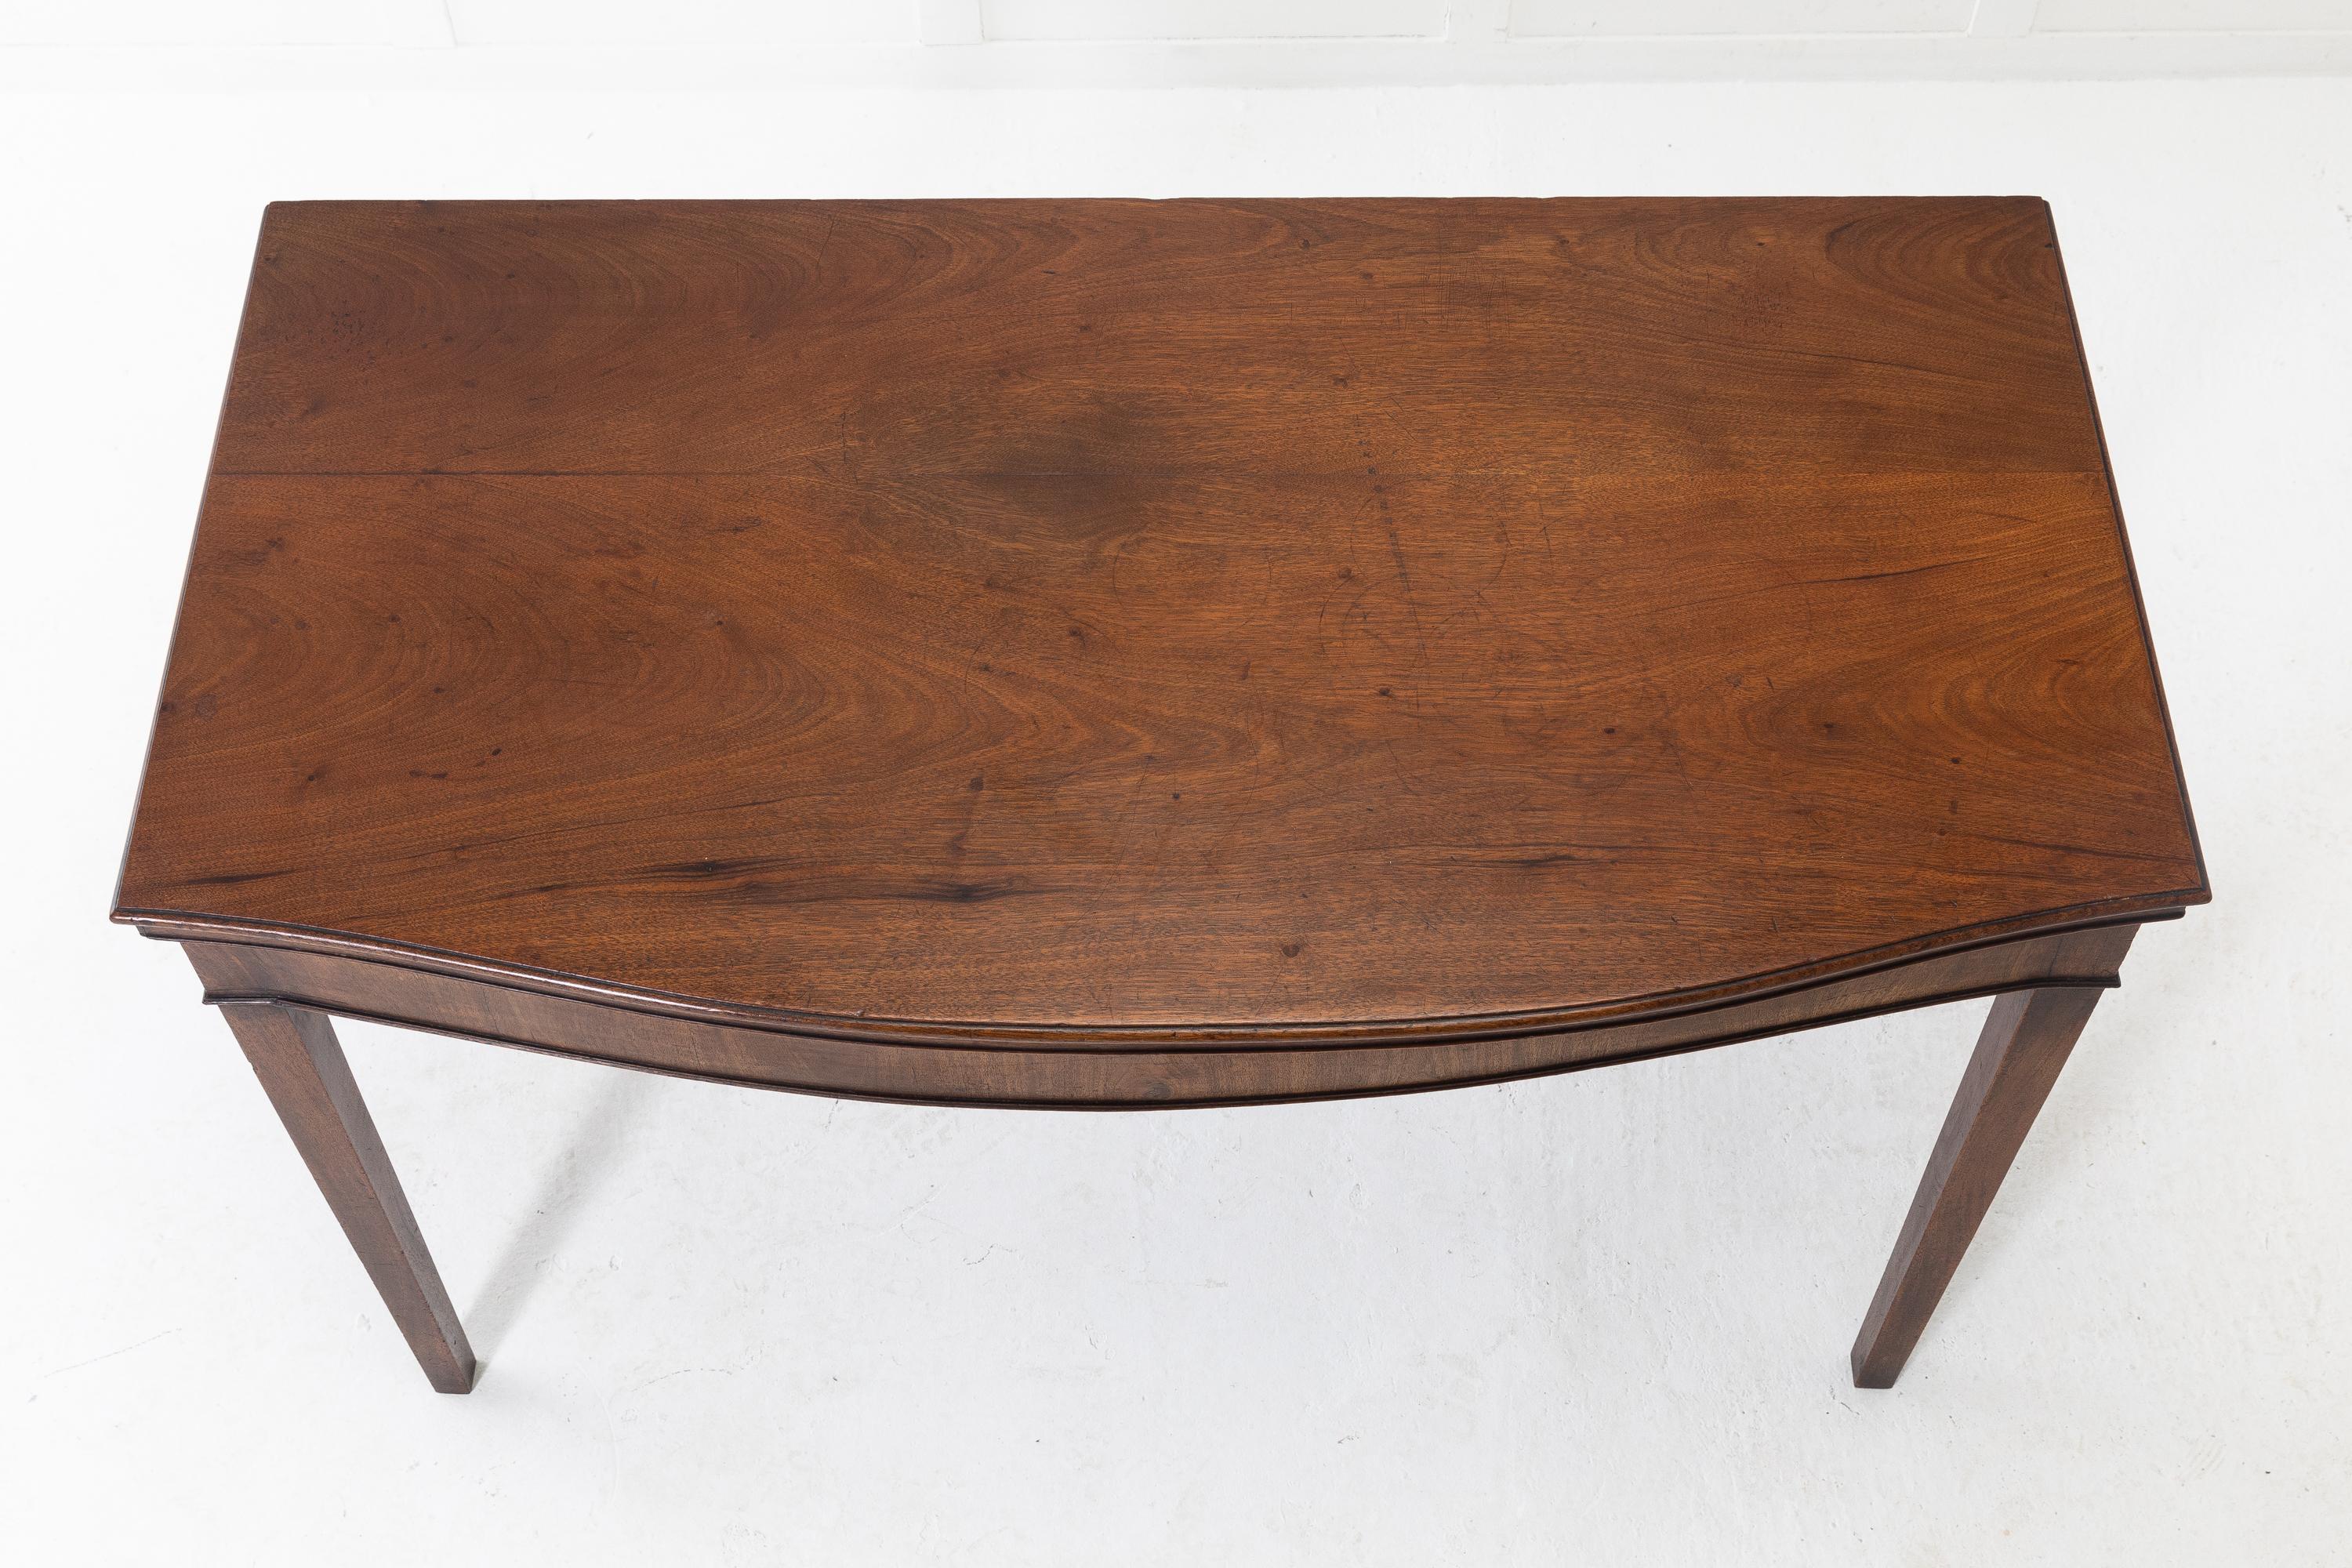 George III mahogany side/serving table, of bow fronted form with a solid mahogany moulded edge top, above a simple frieze. Very good proportions and colour.
    